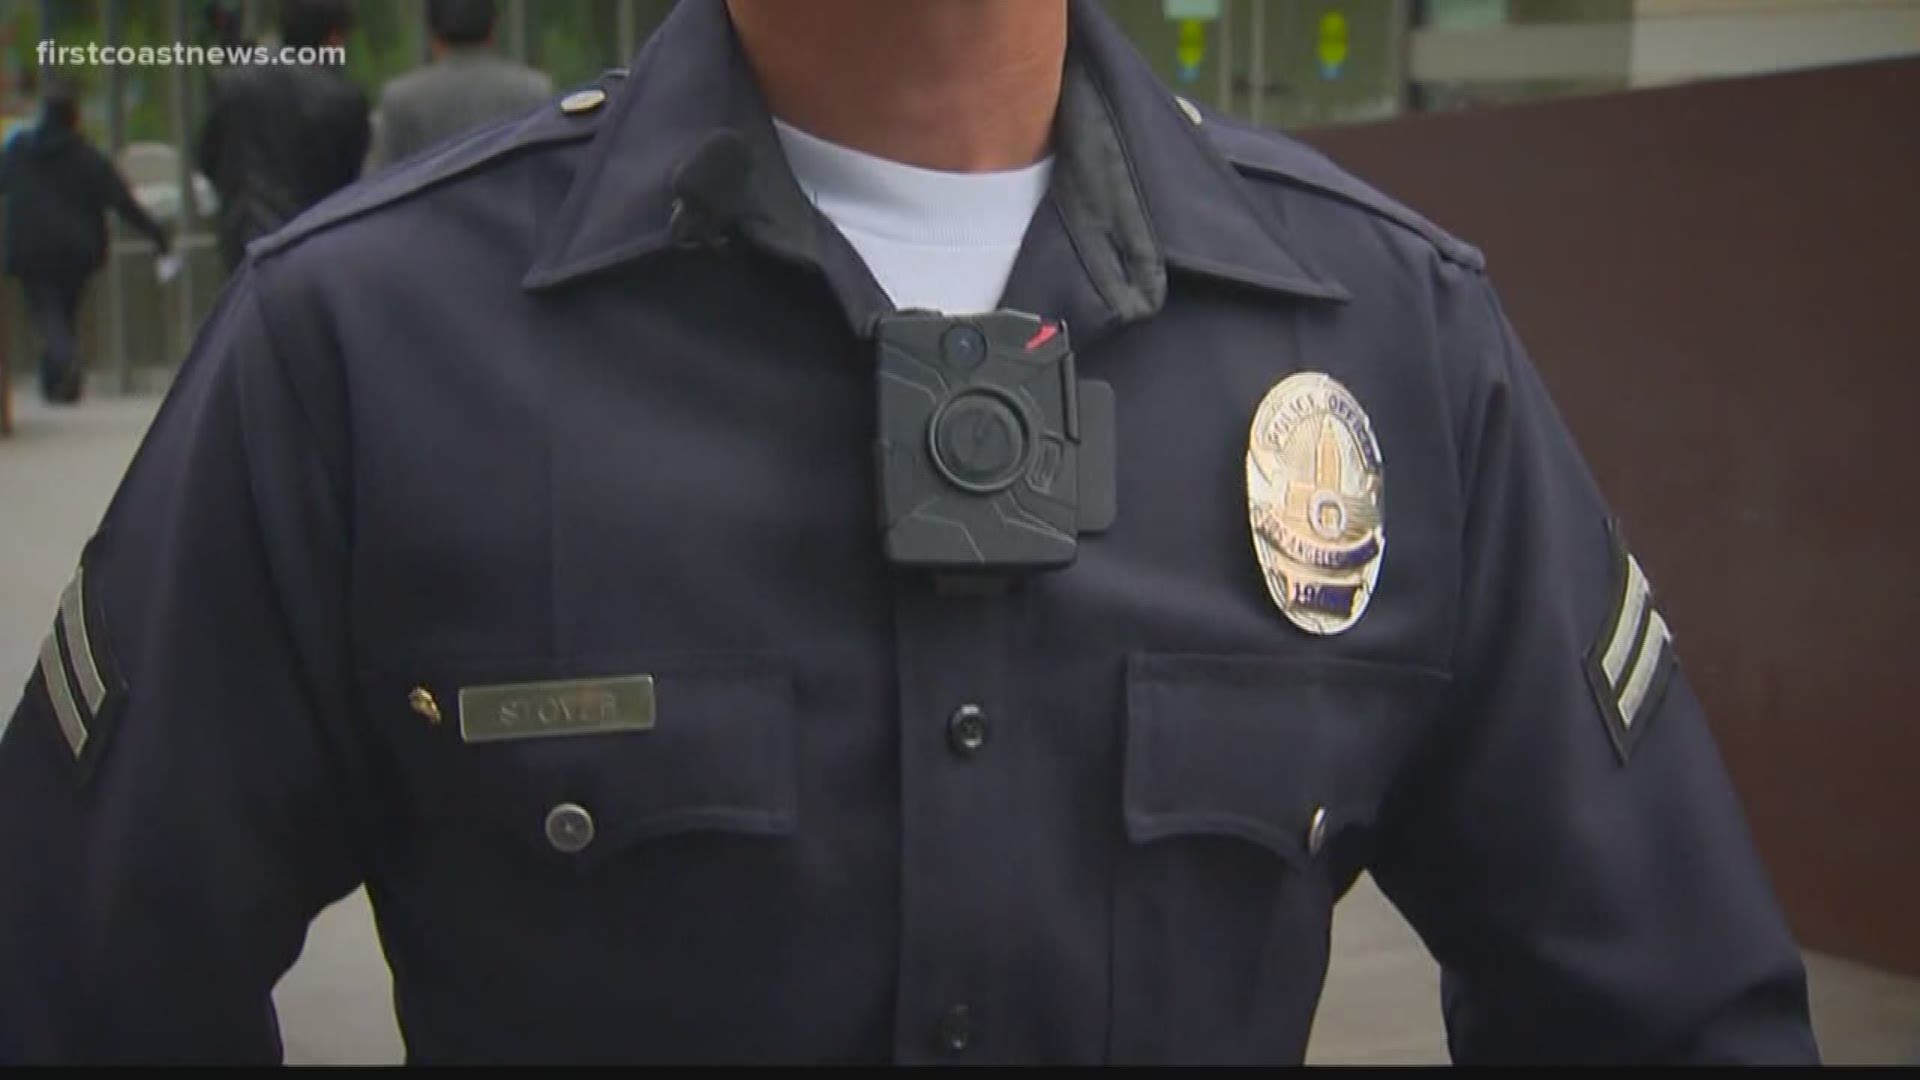 JSO said it was awarded $997,956 in a grant by the Bureau of Justice Assistance for the body cameras, which was approved in their 2018 budget. JSO said it plans to issue 200 devices with the funds as early as September.